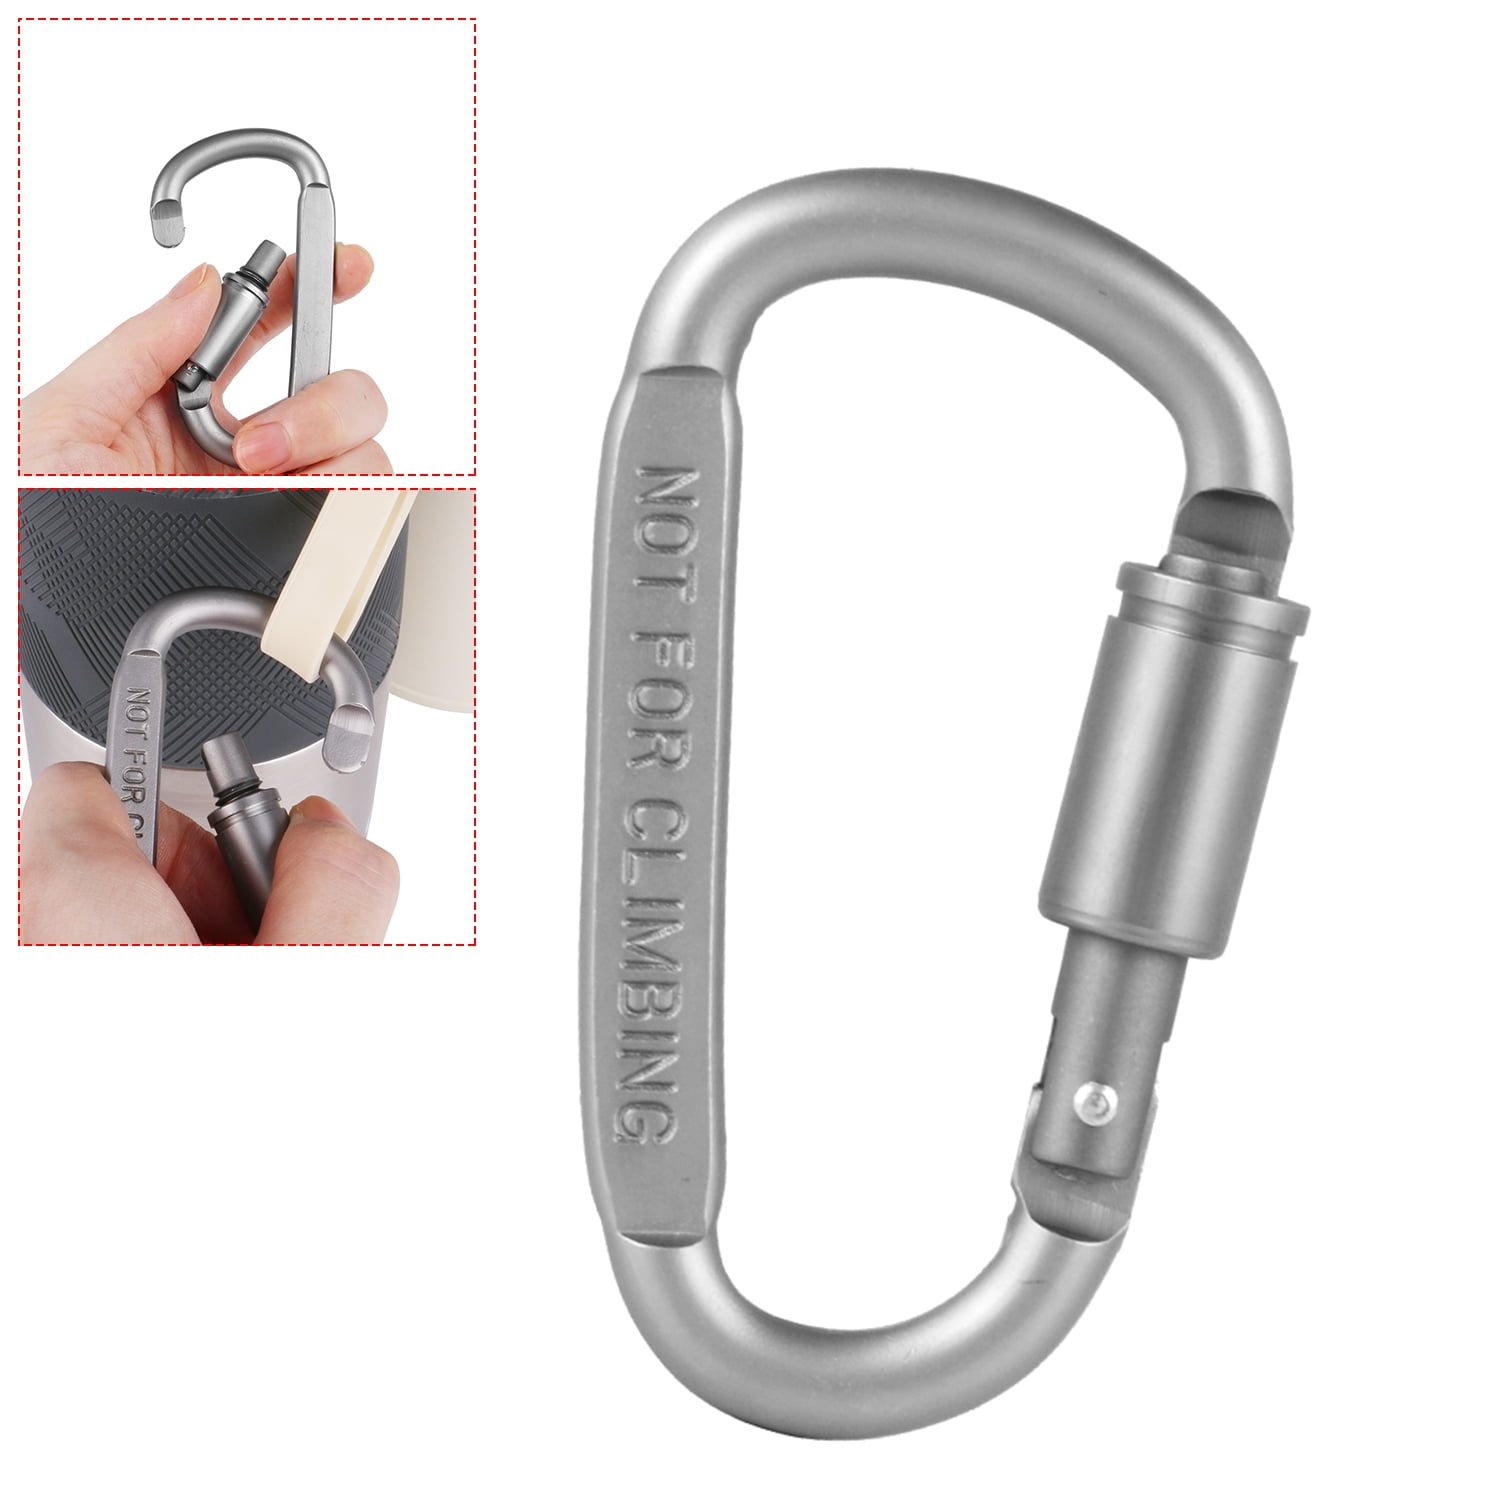 Small Carabiner Clips Hiking Keychain D-Ring Home Hardware Accessories 